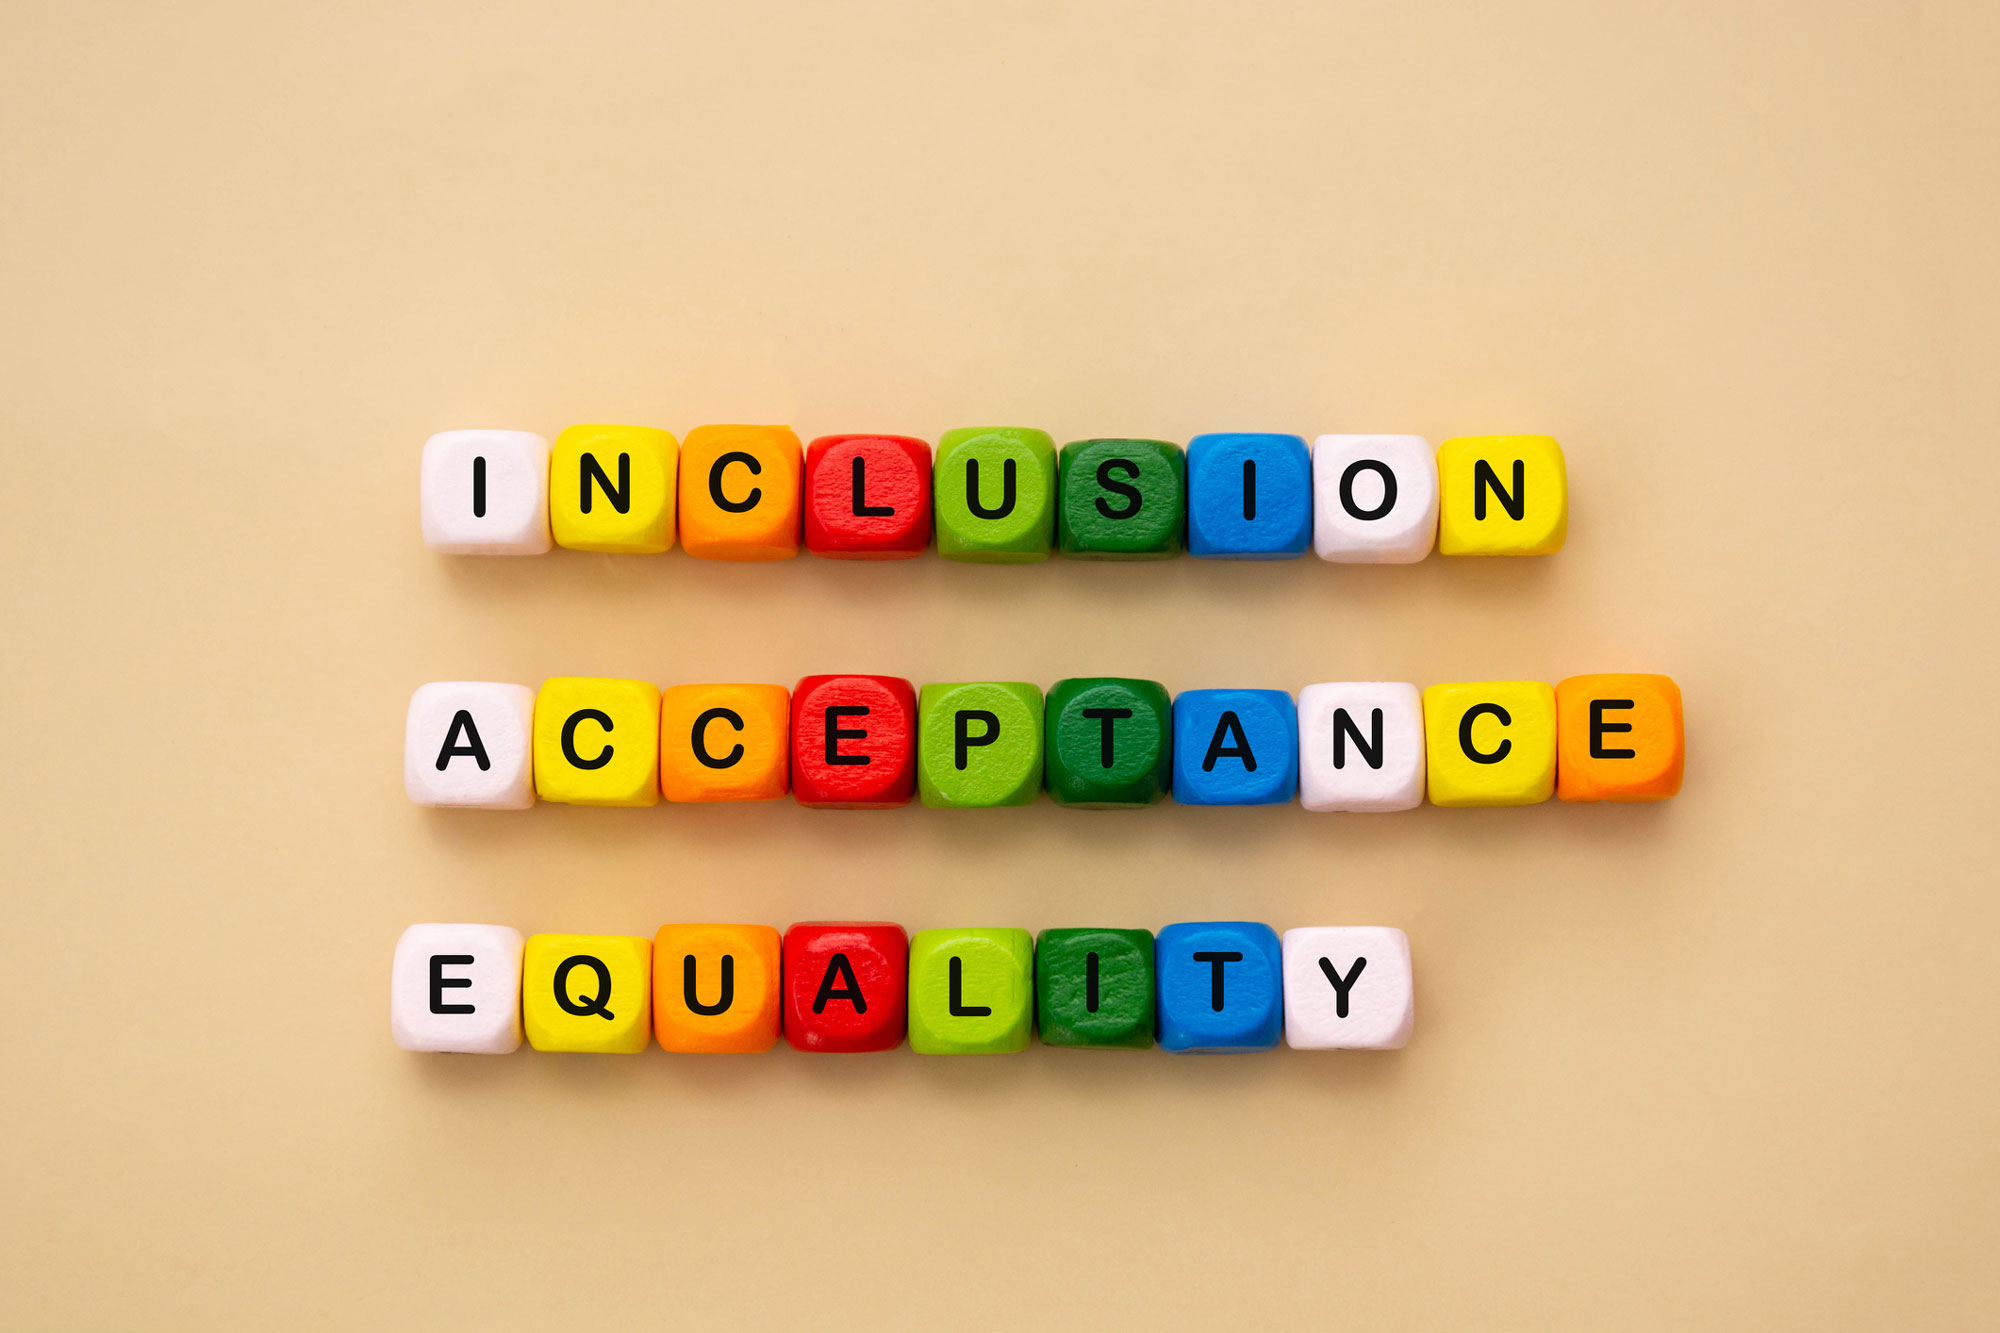 Inclusion, acceptance and equality words made from colorful wooden cubes